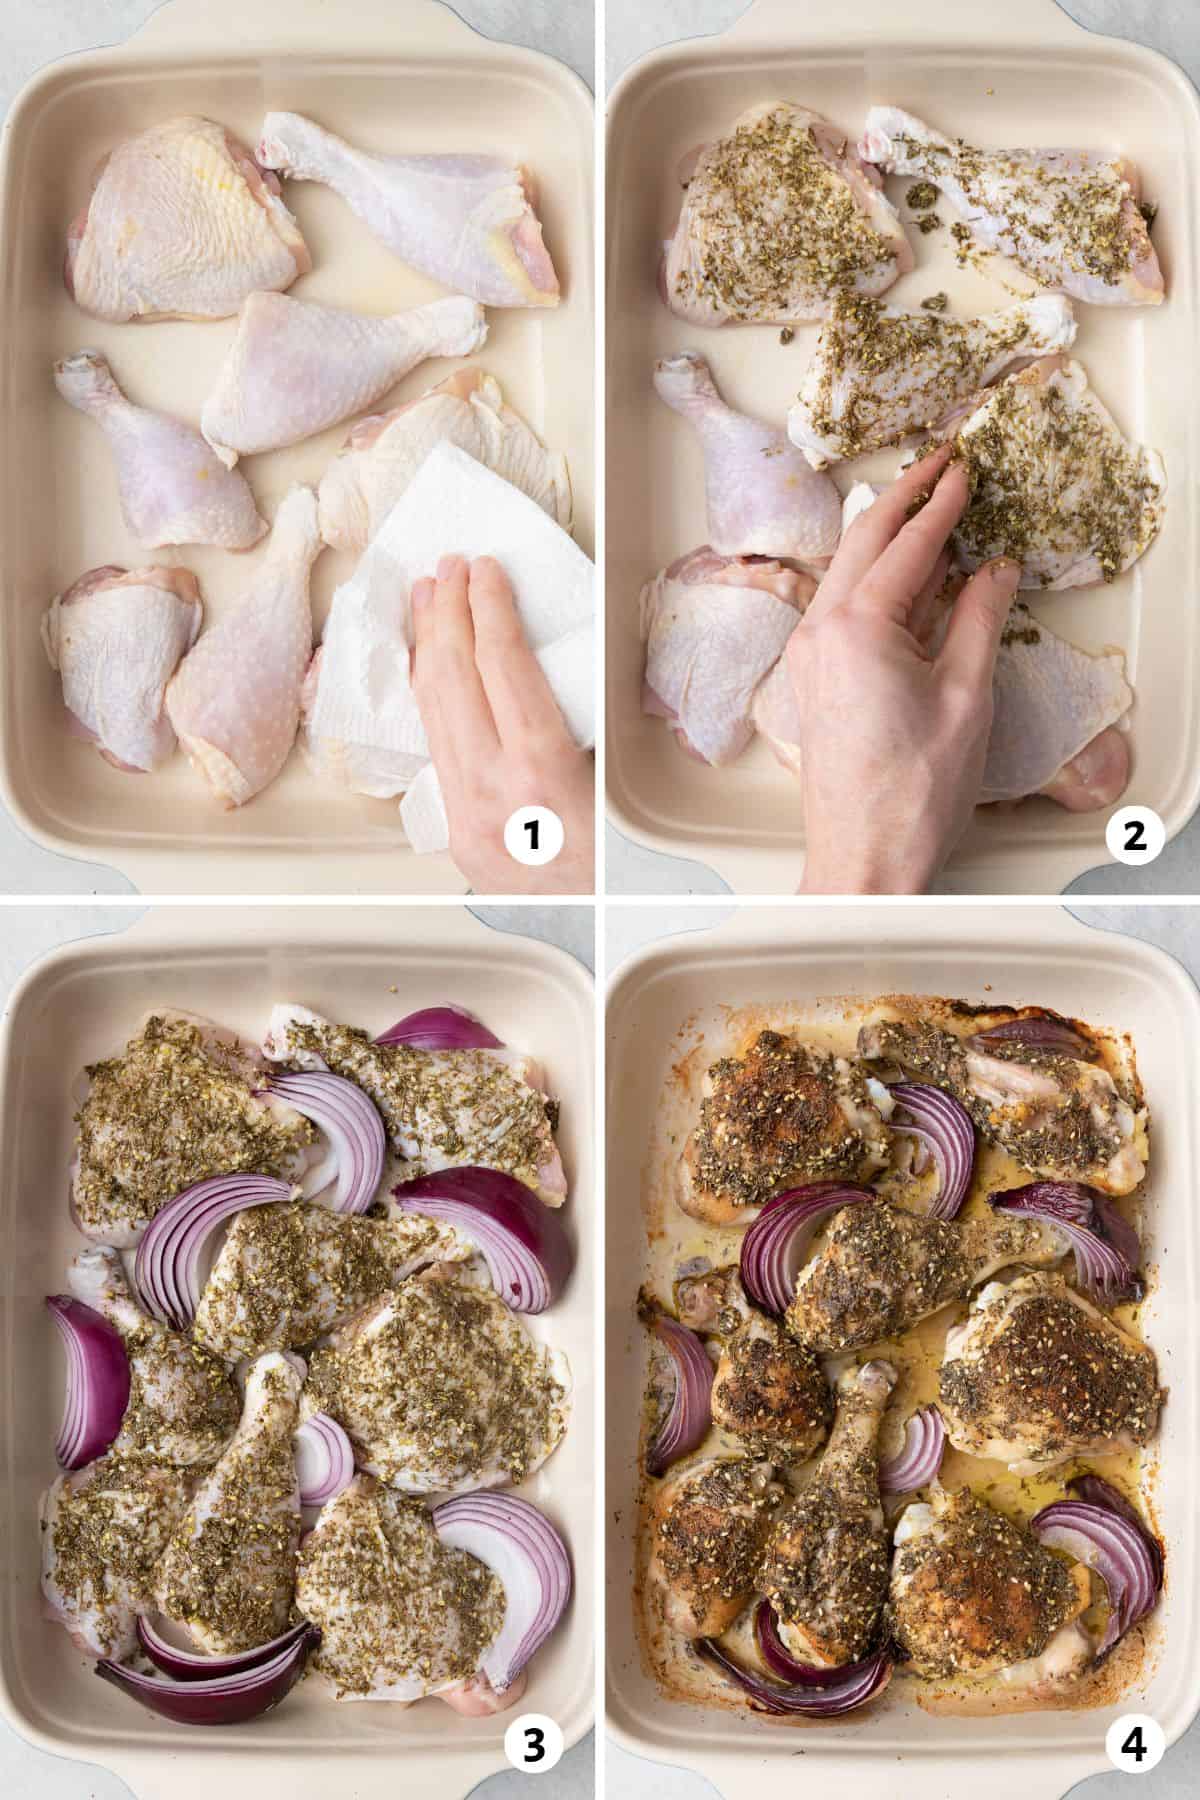 4 image collage making recipe in a baking dish: 1- patting chicken dry with a paper towel, 2- rubbing seasoning on chicken, 3- red onions added to dish, 4- after baking.